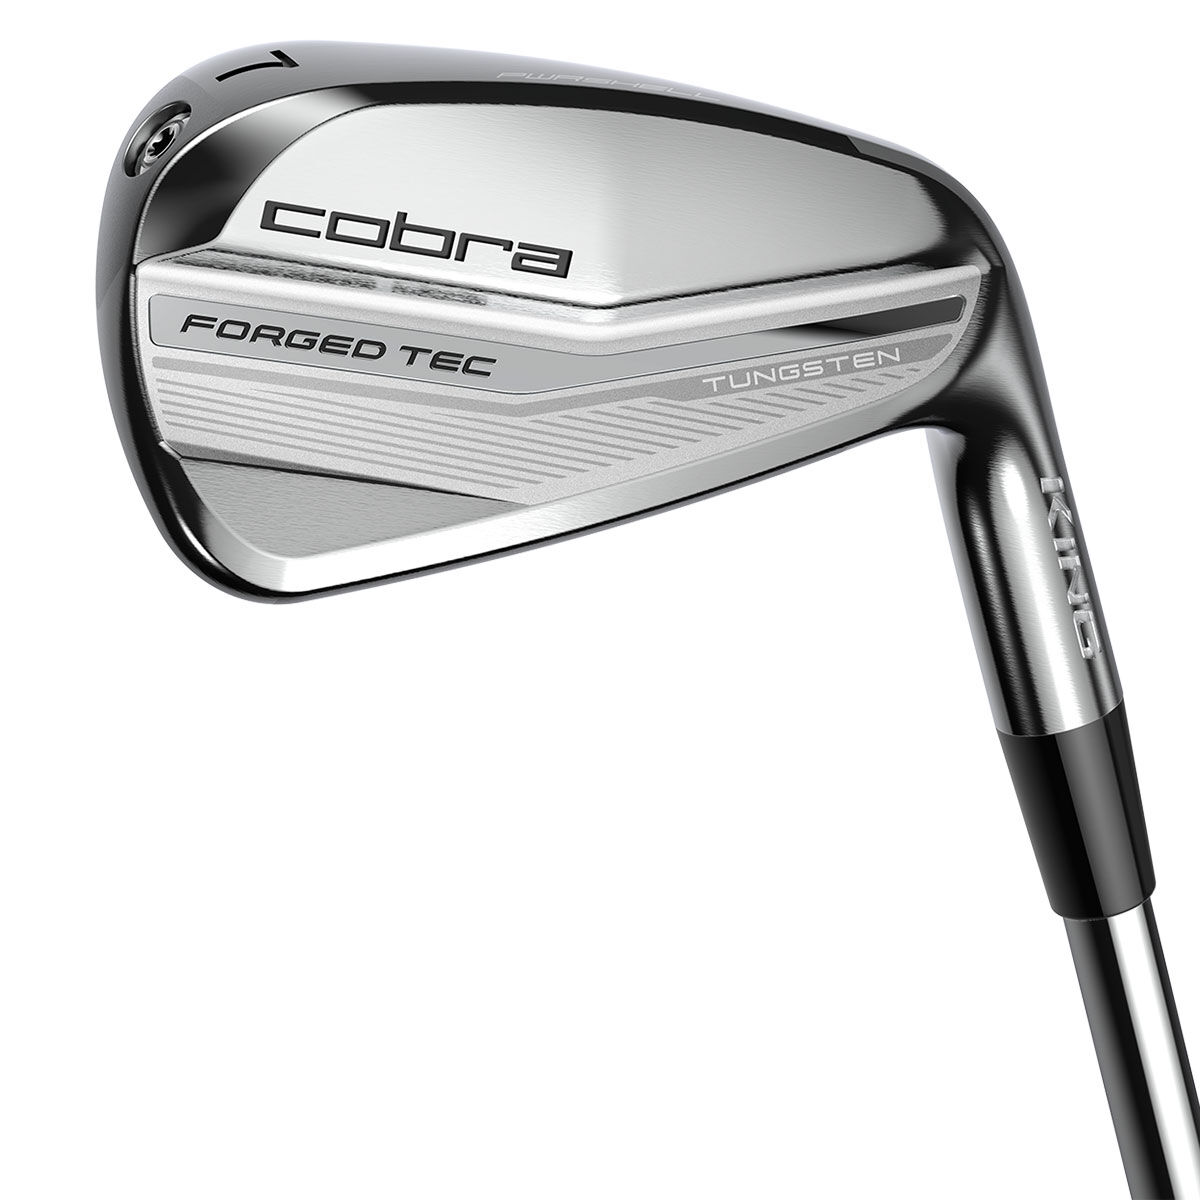 Cobra Golf Silver and Black King Forged Tec Steel Right Hand 4-Pw 7 Golf Irons | American Golf, One Size von Cobra